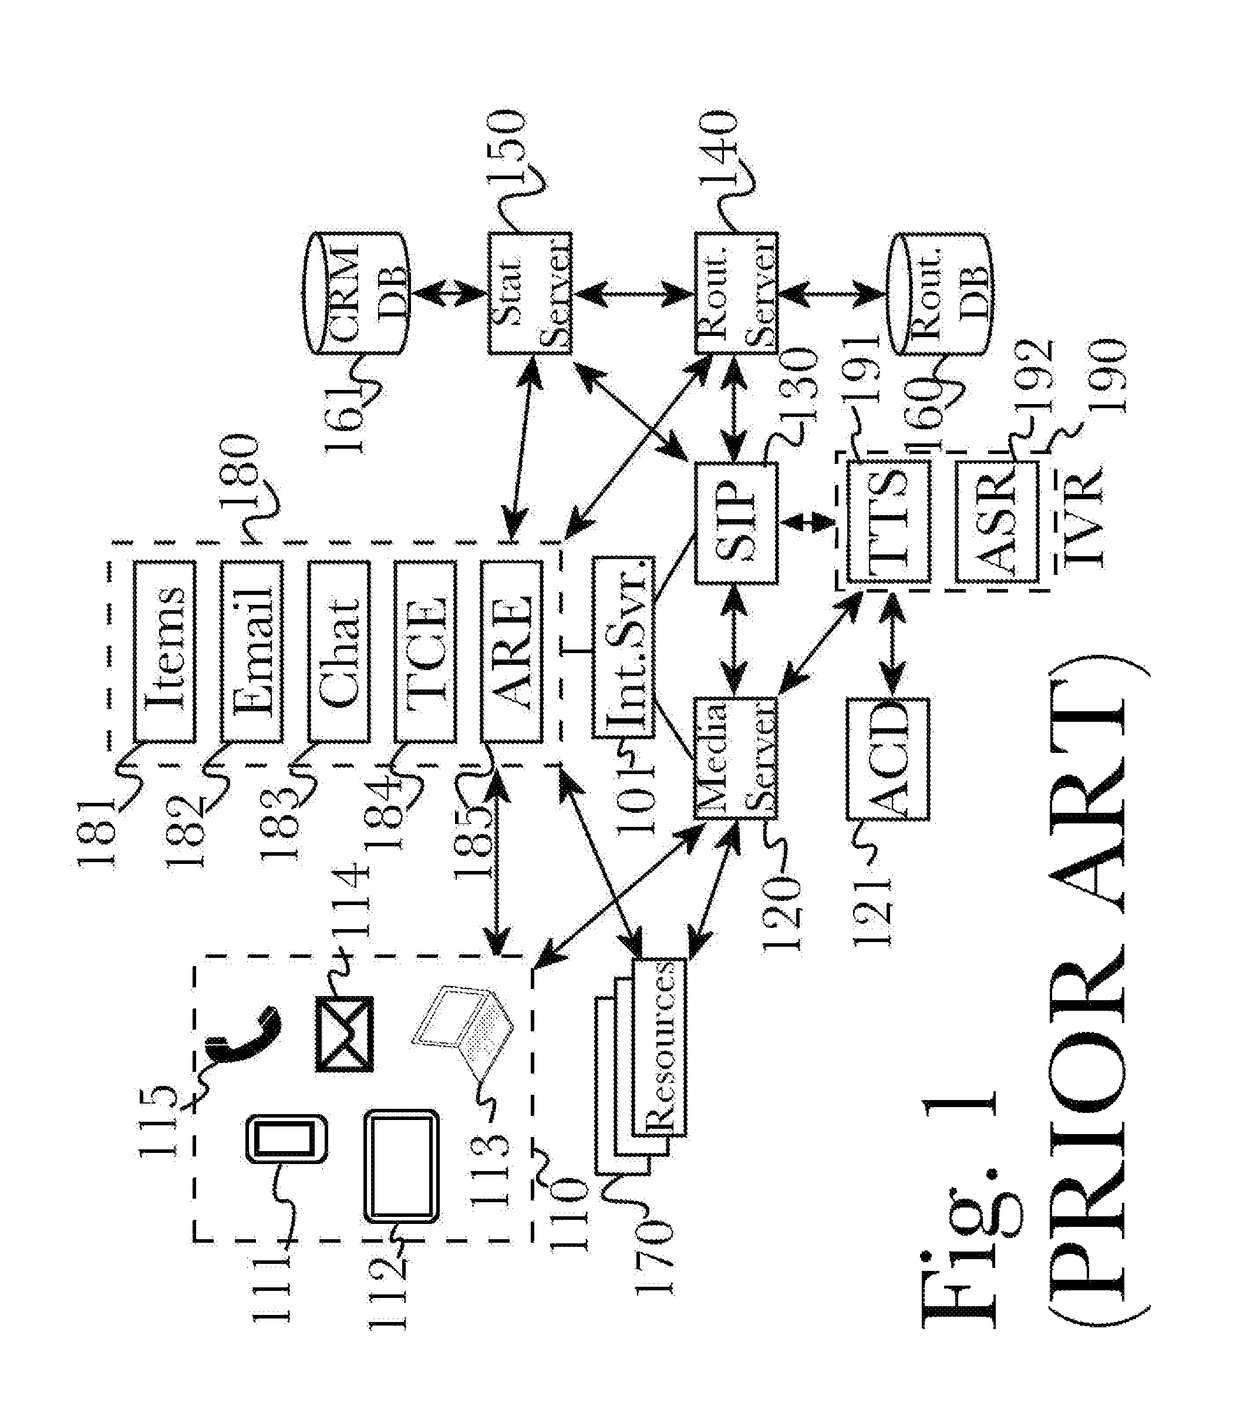 System and methods for using conversational similarity for dimension reduction in deep analytics